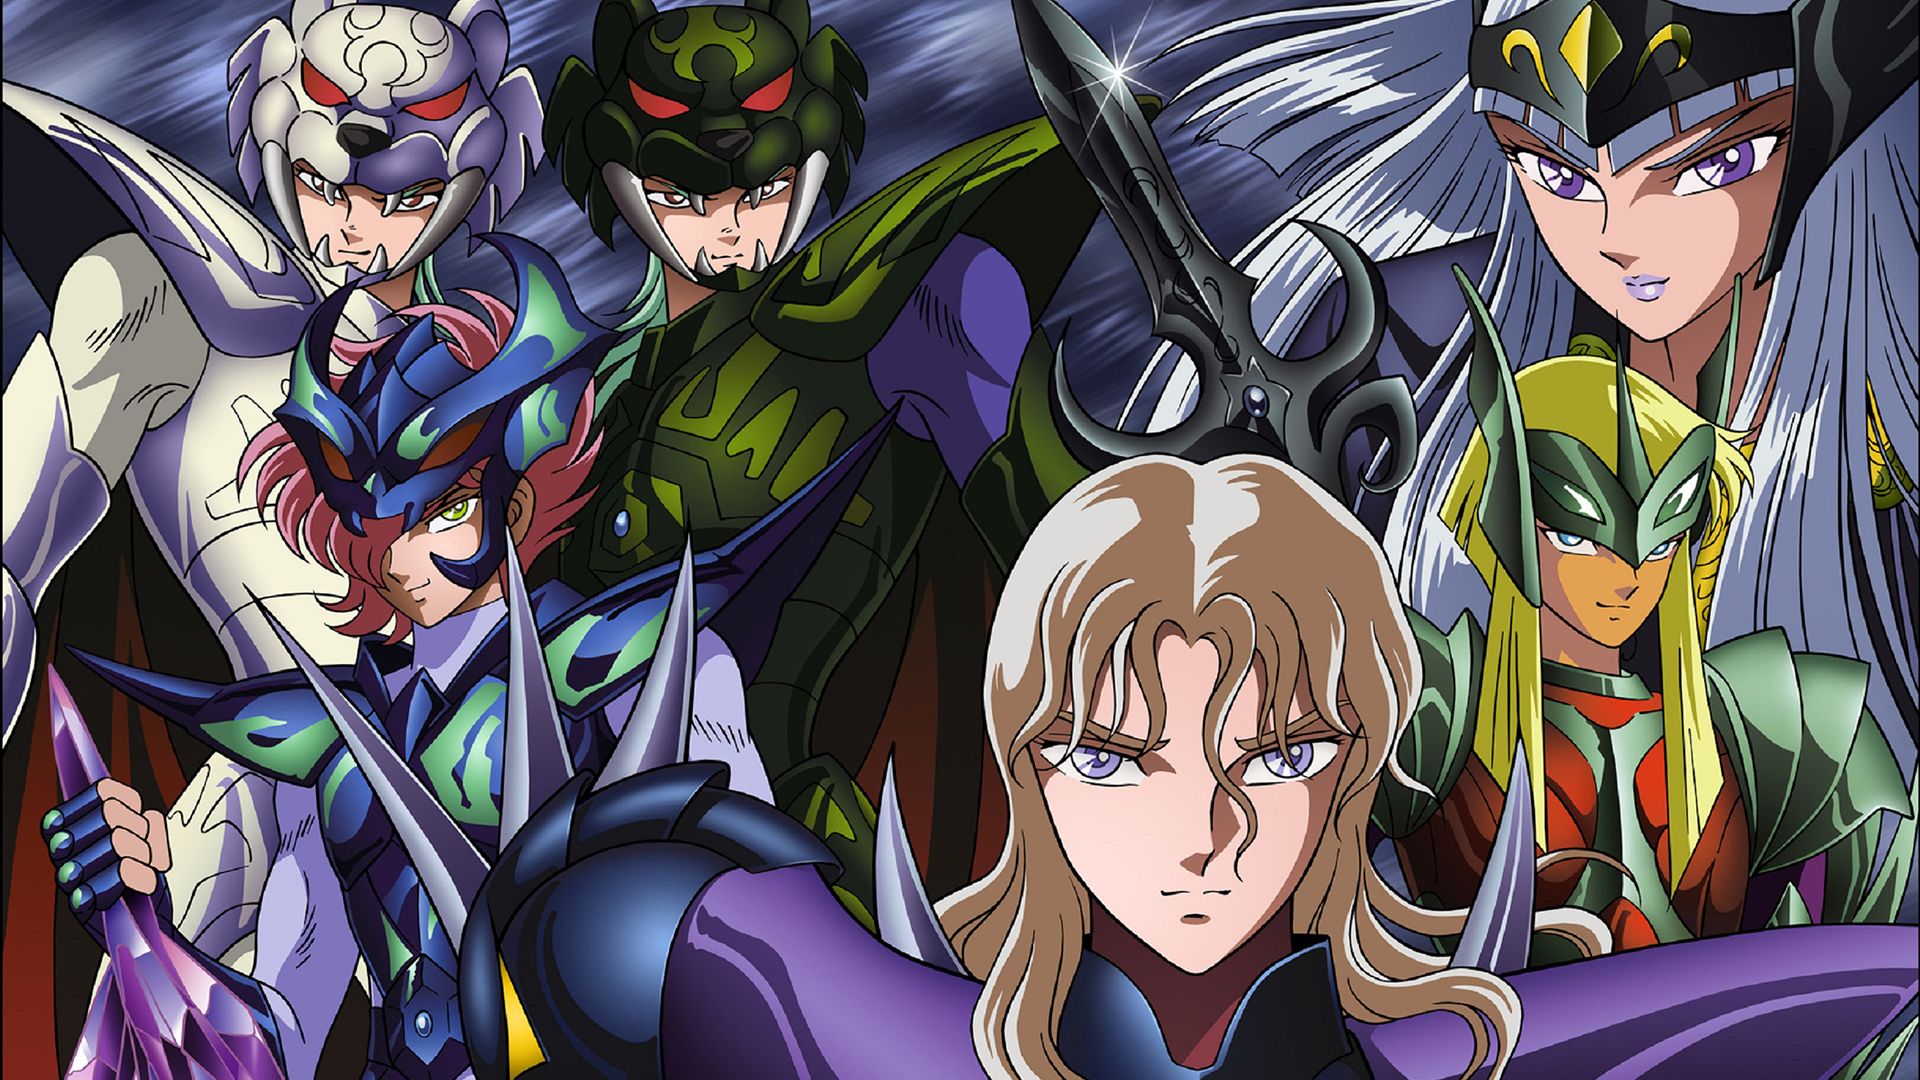 An Influential Classic Anime Series is Finally Coming to Crunchyroll